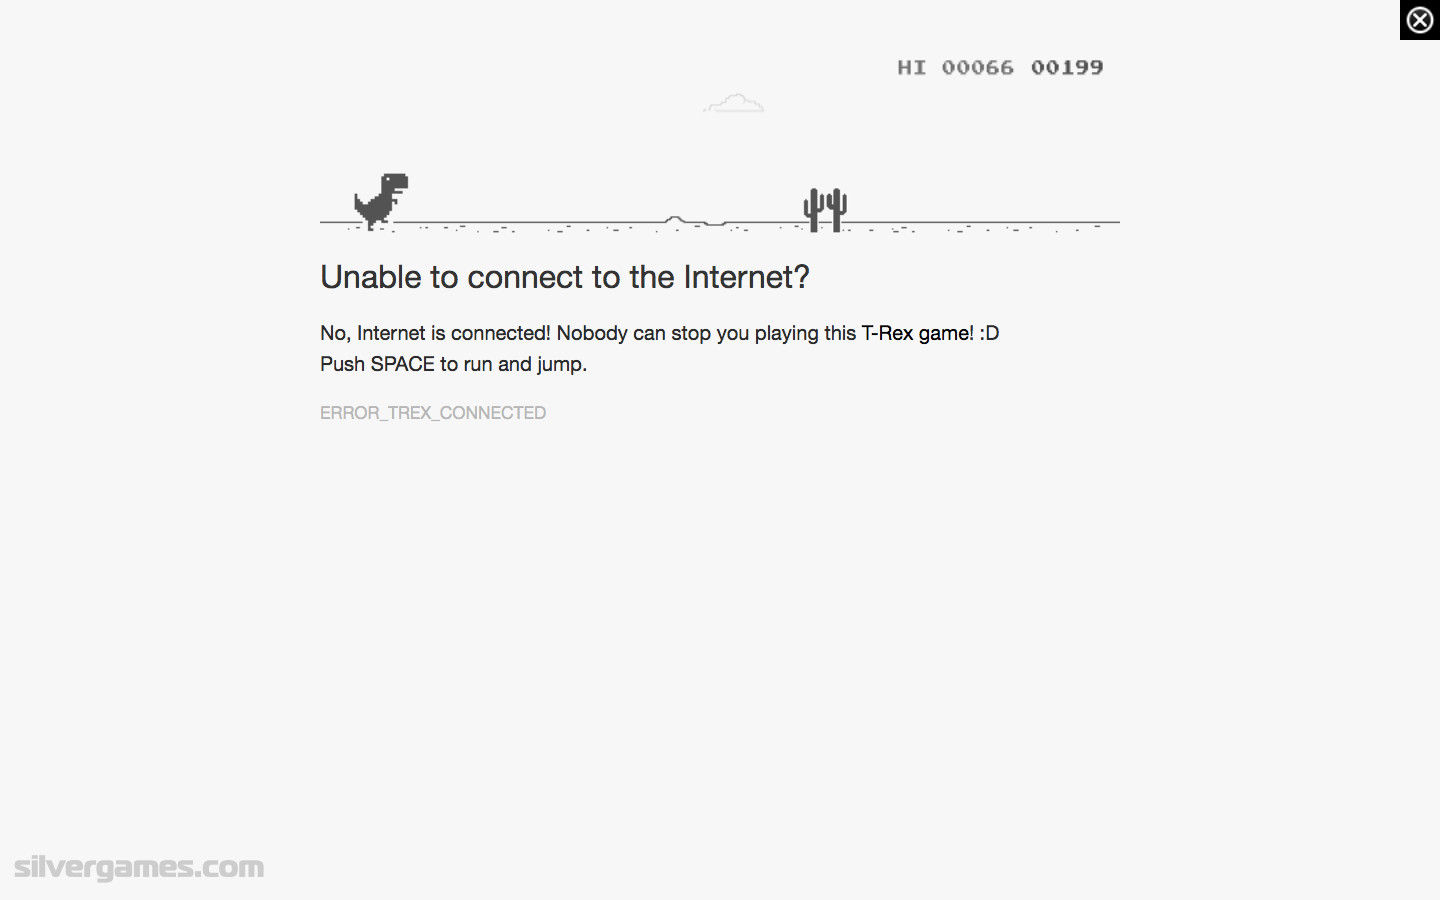 DINO GAME 🦖 - Play the No Internet Game Online!